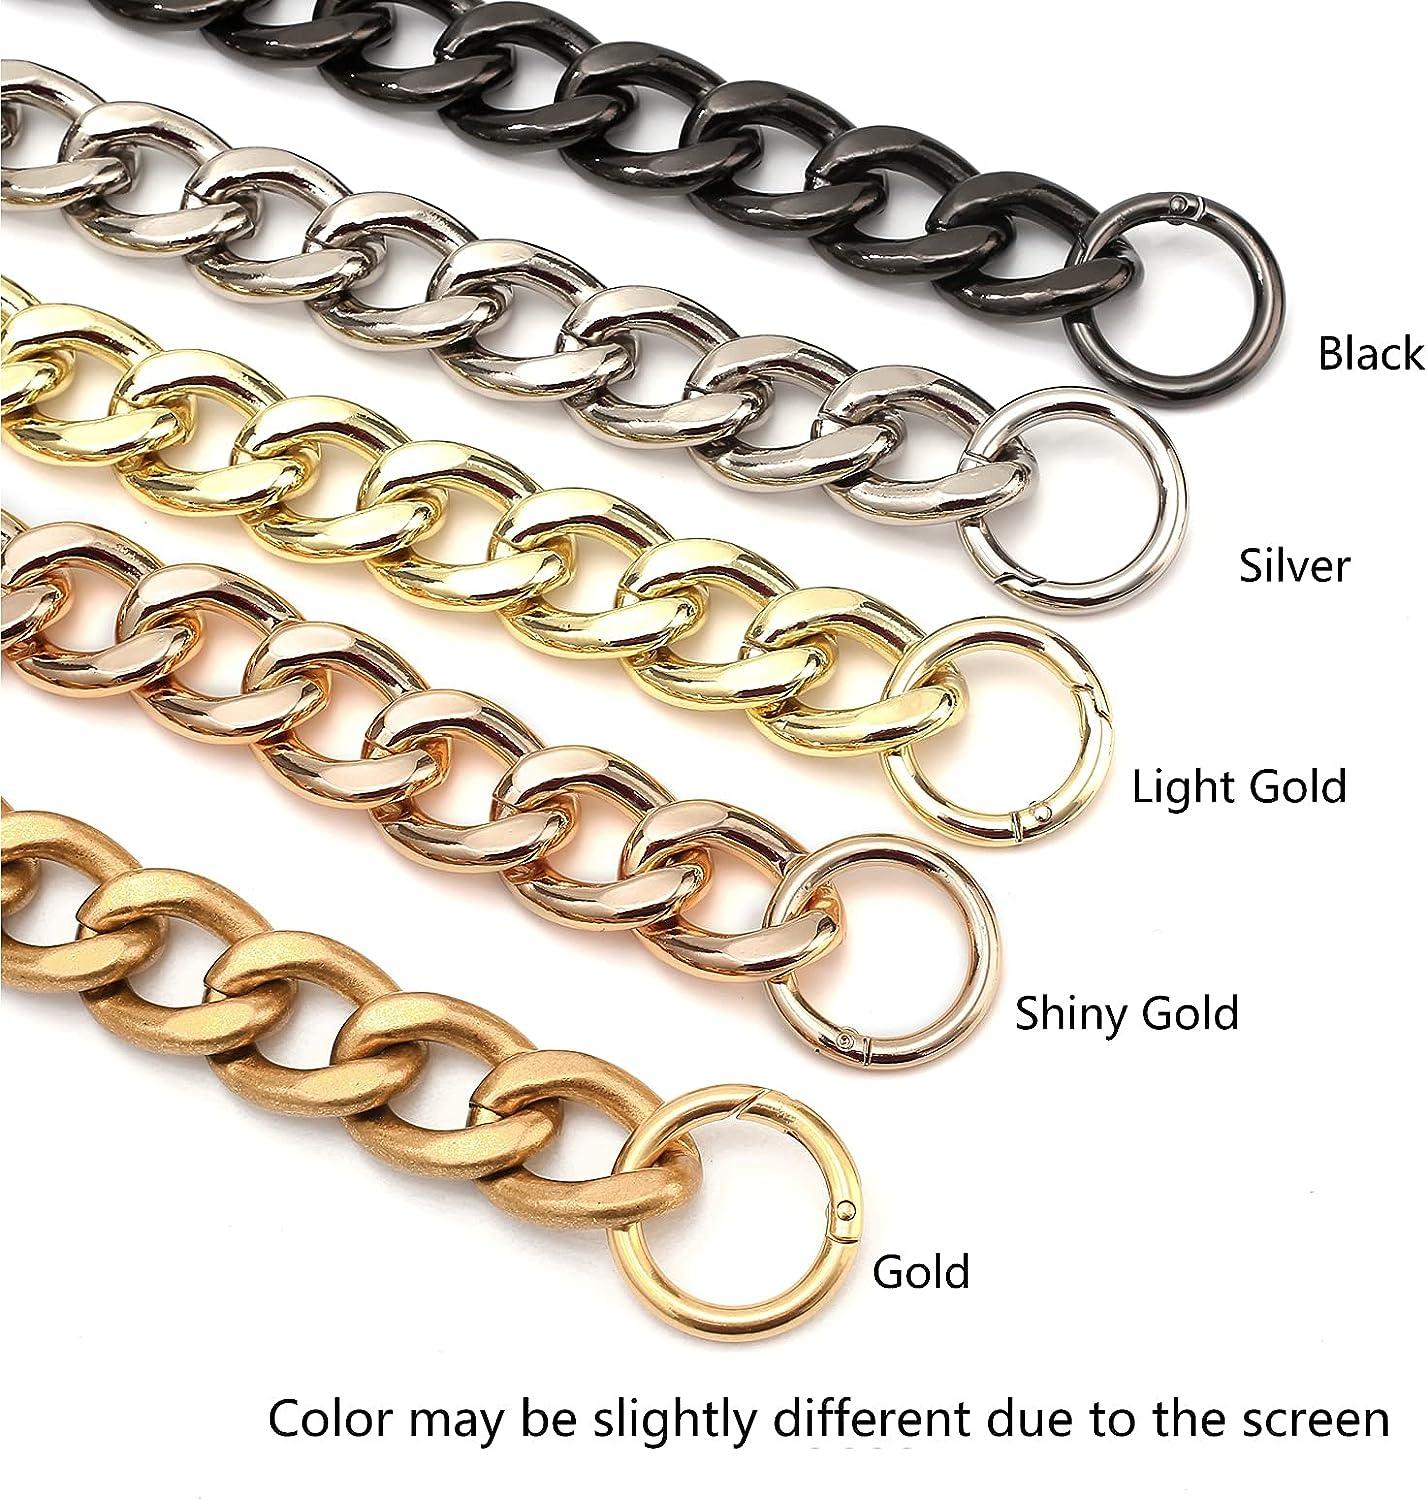 Xiazw DIY Heavy Chunky Aluminum Metal Purse Handle Bag Chains Charms Straps  Replacement Handbag Accessories Decoration (Gold)